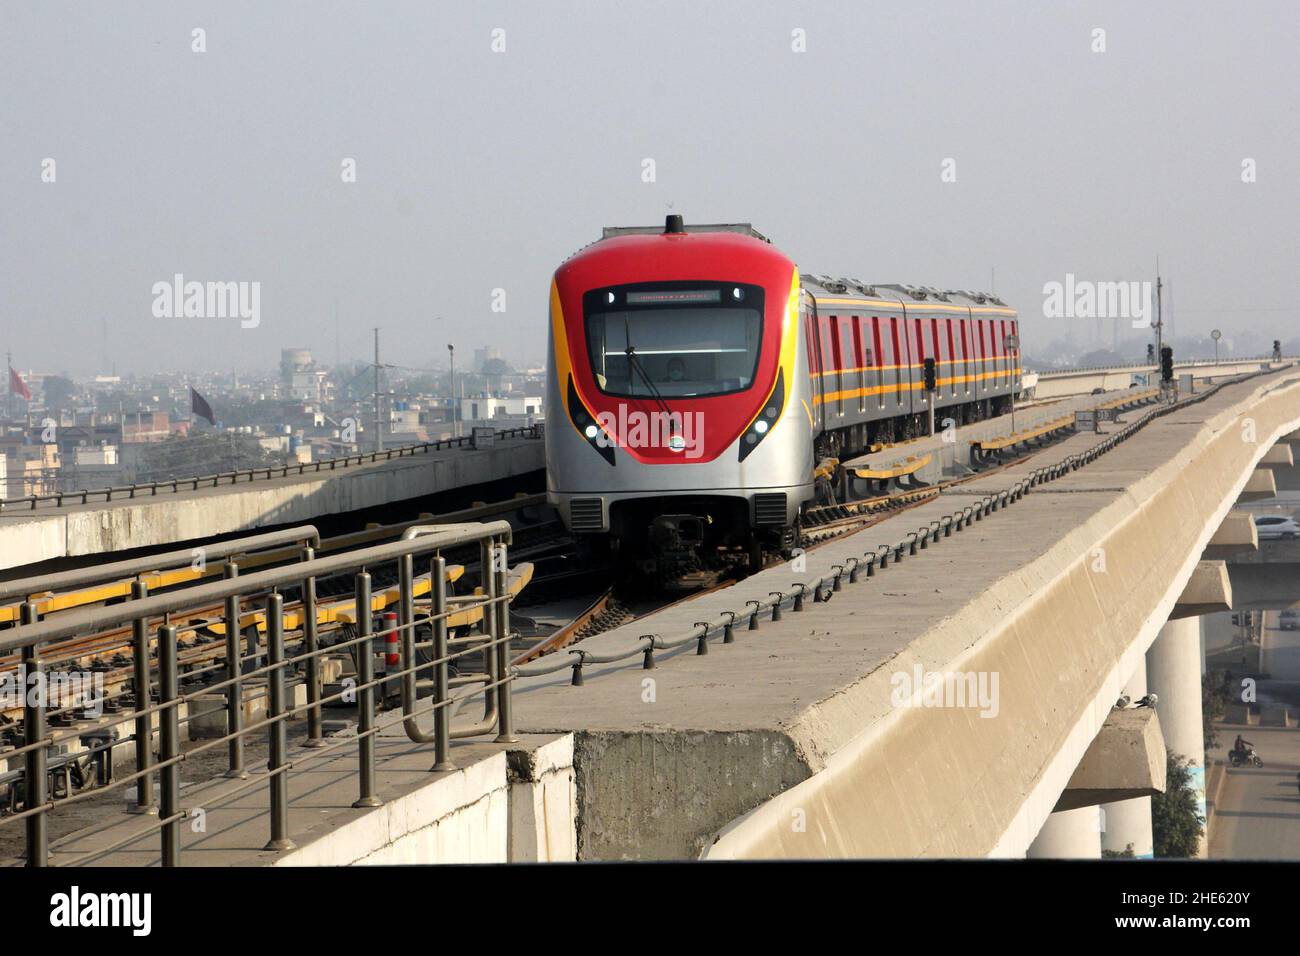 Lahore, Pakistan. 29th Dec, 2021. An Orange Line metro train pulls into the terminal station in Lahore, Pakistan, Dec. 29, 2021. Officially open to traffic on Oct. 25, 2020, the eco-friendly Orange Line metro train is an early project under the China-Pakistan Economic Corridor (CPEC), a flagship project of the China-proposed Belt and Road Initiative. TO GO WITH 'Feature: Lahore Orange Line, epitome of China-Pakistan friendship' Credit: Jamil Ahmed/Xinhua/Alamy Live News Stock Photo